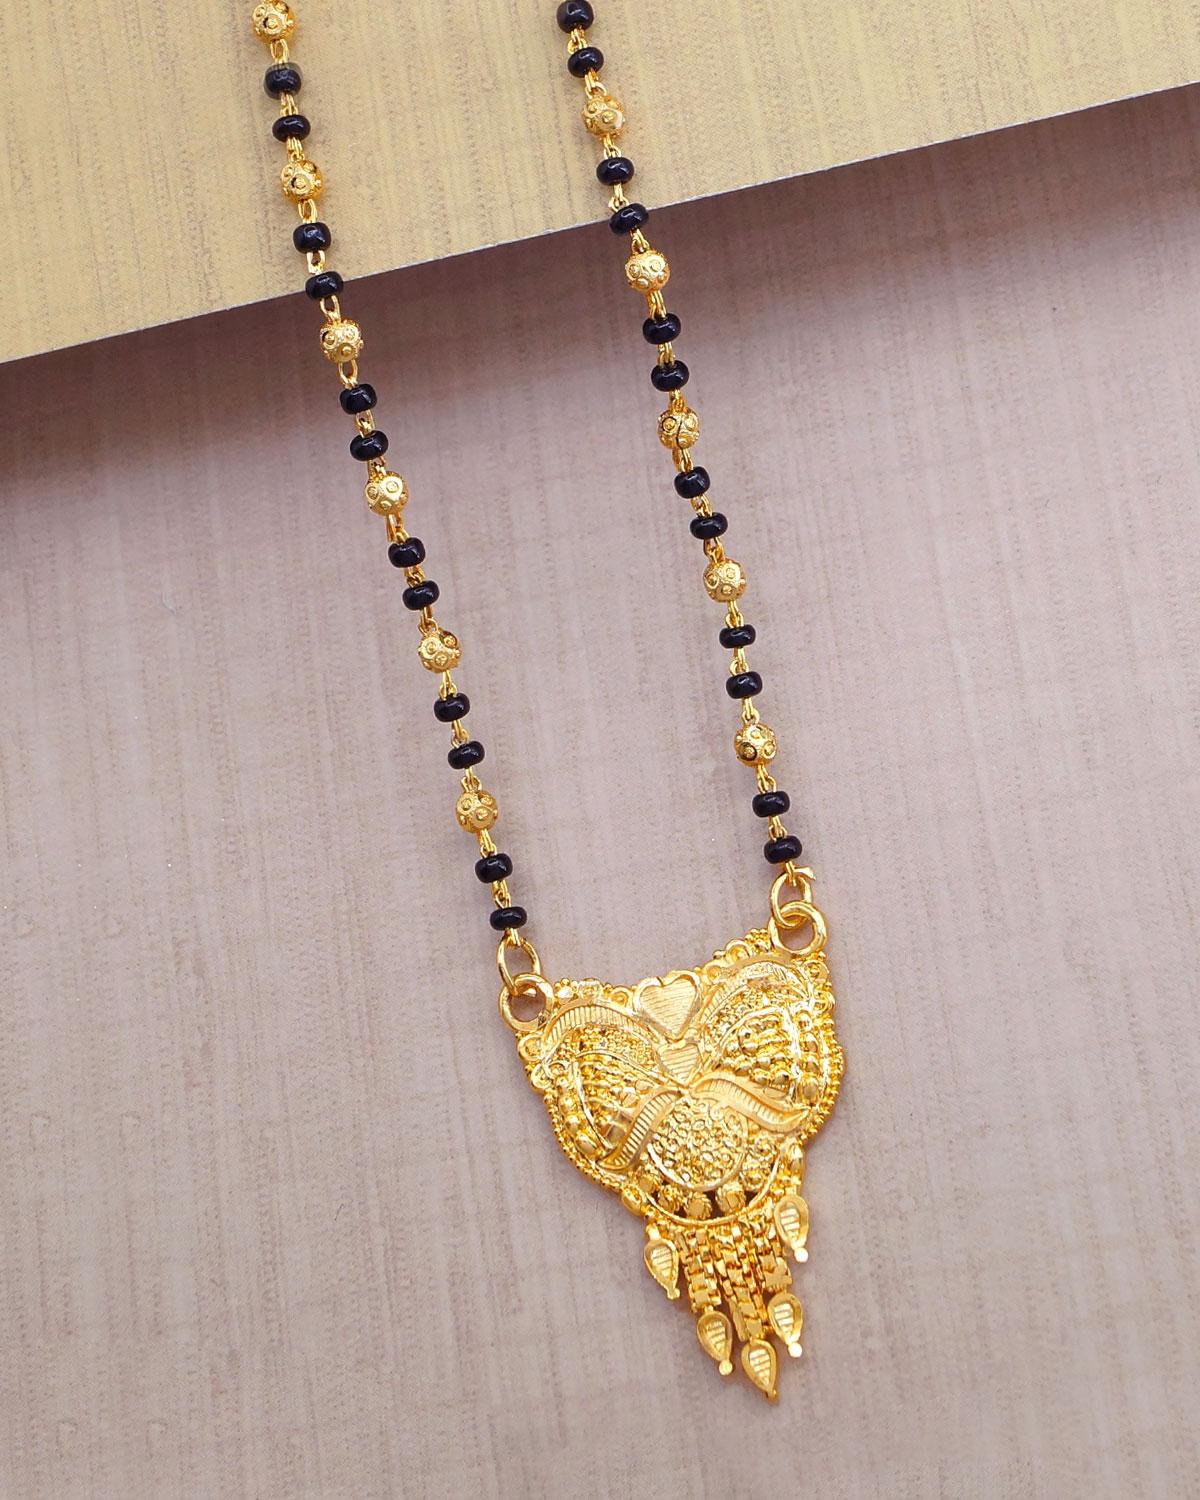 Single Line Mixed Gold And Black Beads Mangalsutra Chain For Married Women